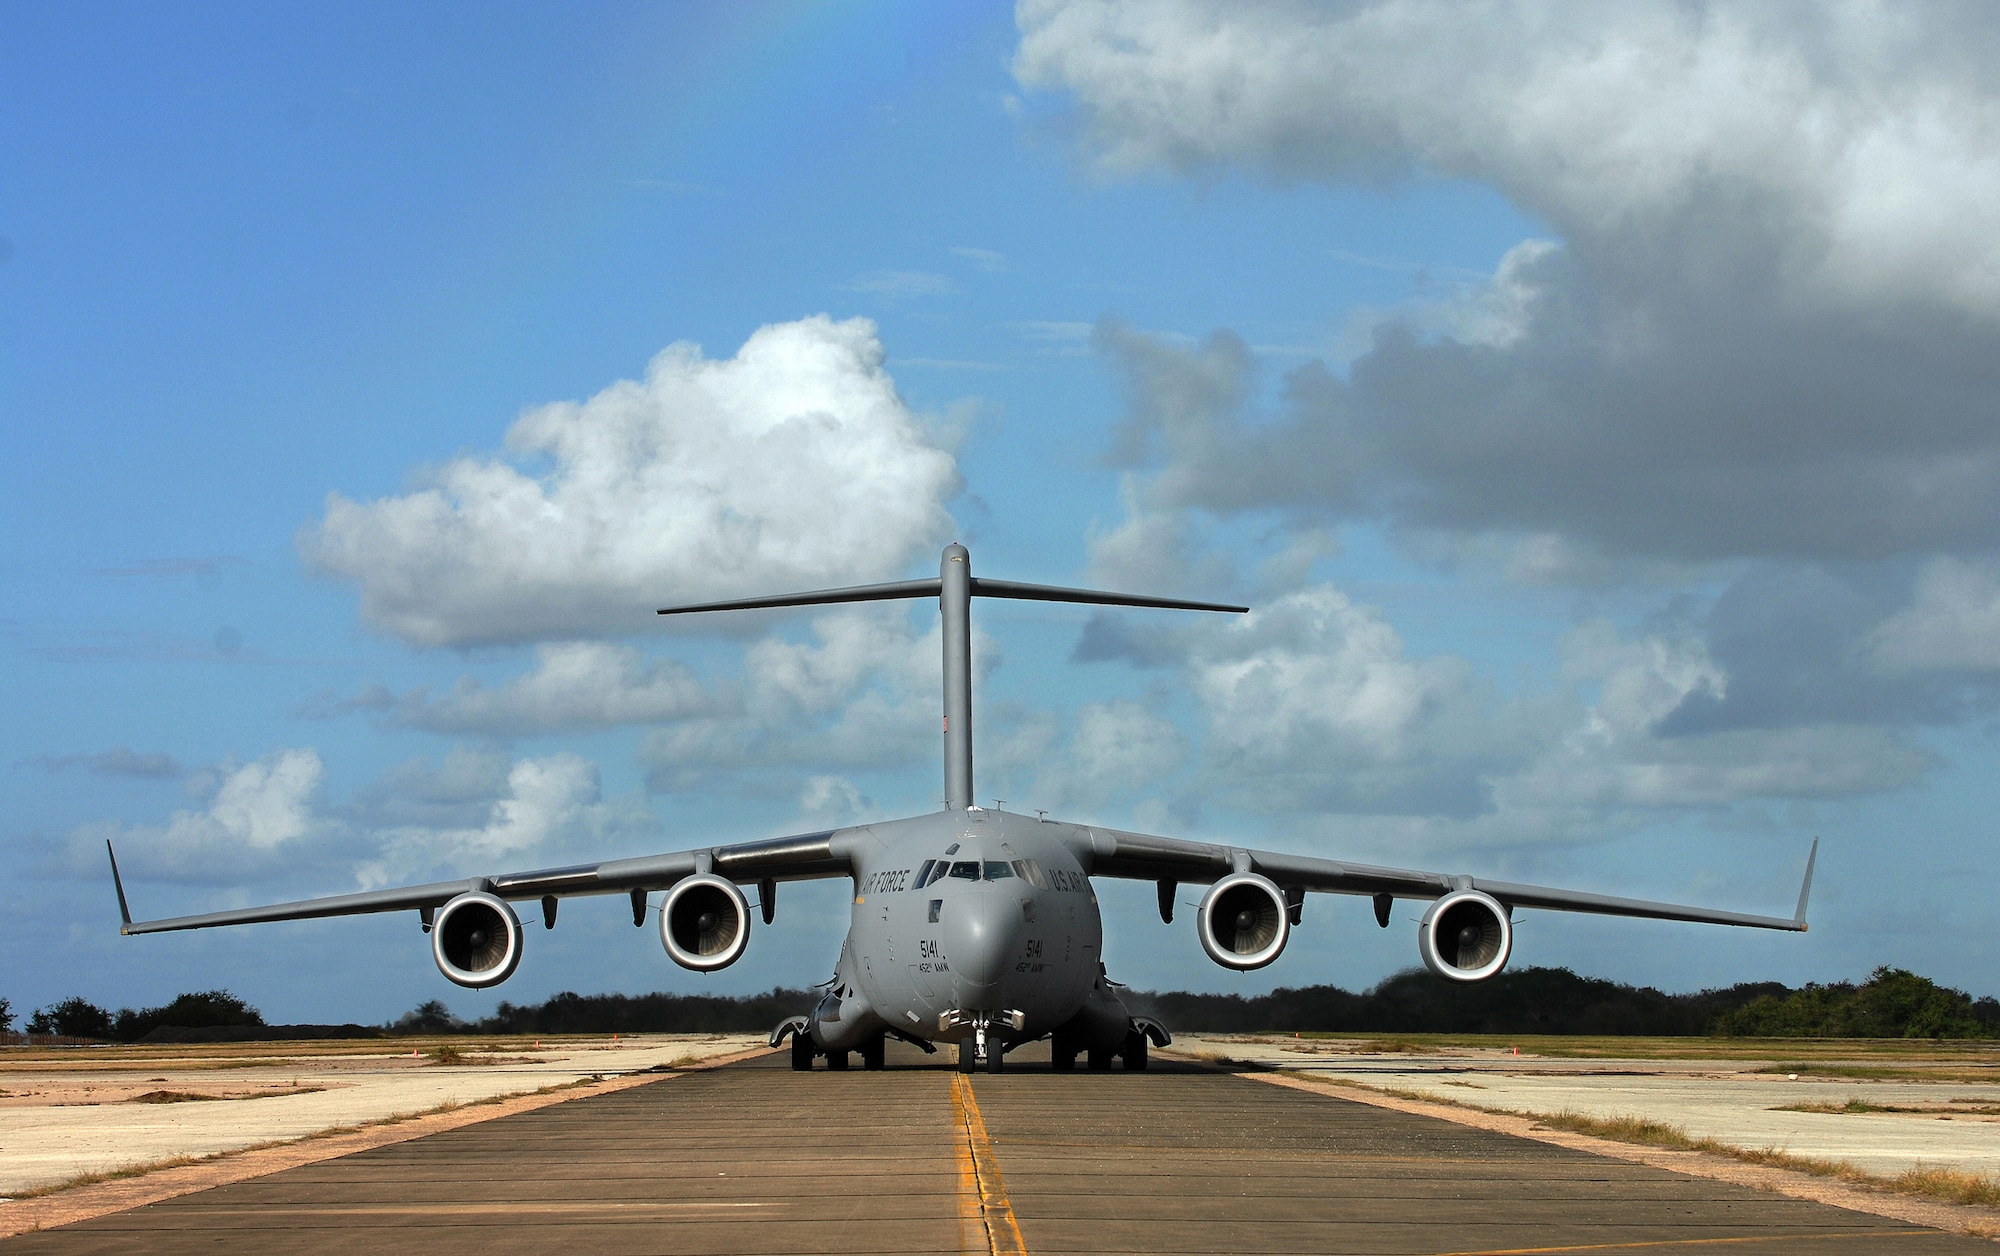 A C-17 Globemaster III from the 452nd Air Mobility Wing at March Air Reserve Base, Calif., taxis May 2, 2009, at Ramey Field, Puerto Rico, during Patriot Hoover 2009. The exercise is a large-scale air mobility exercise involving units with Air Force Reserve Command, Puerto Rico's Air National Guard, and units from the FBI.  . (U.S. Air Force photo/Master Sgt Rick Sforza)